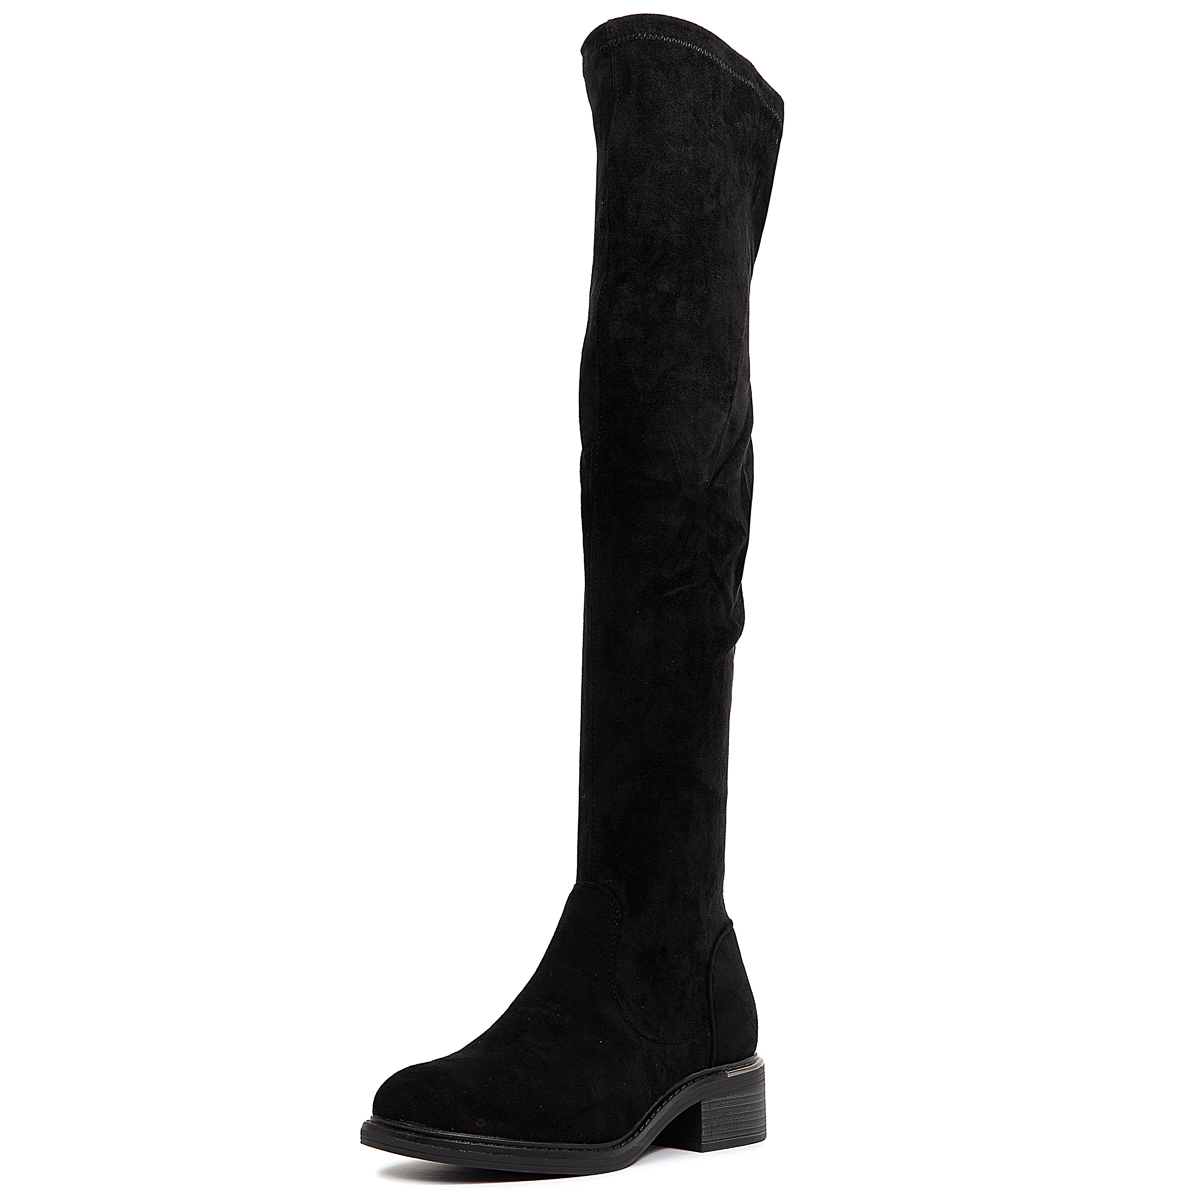 Vegan black leather over the knee flat boots NIGHT OUT - Glamazons